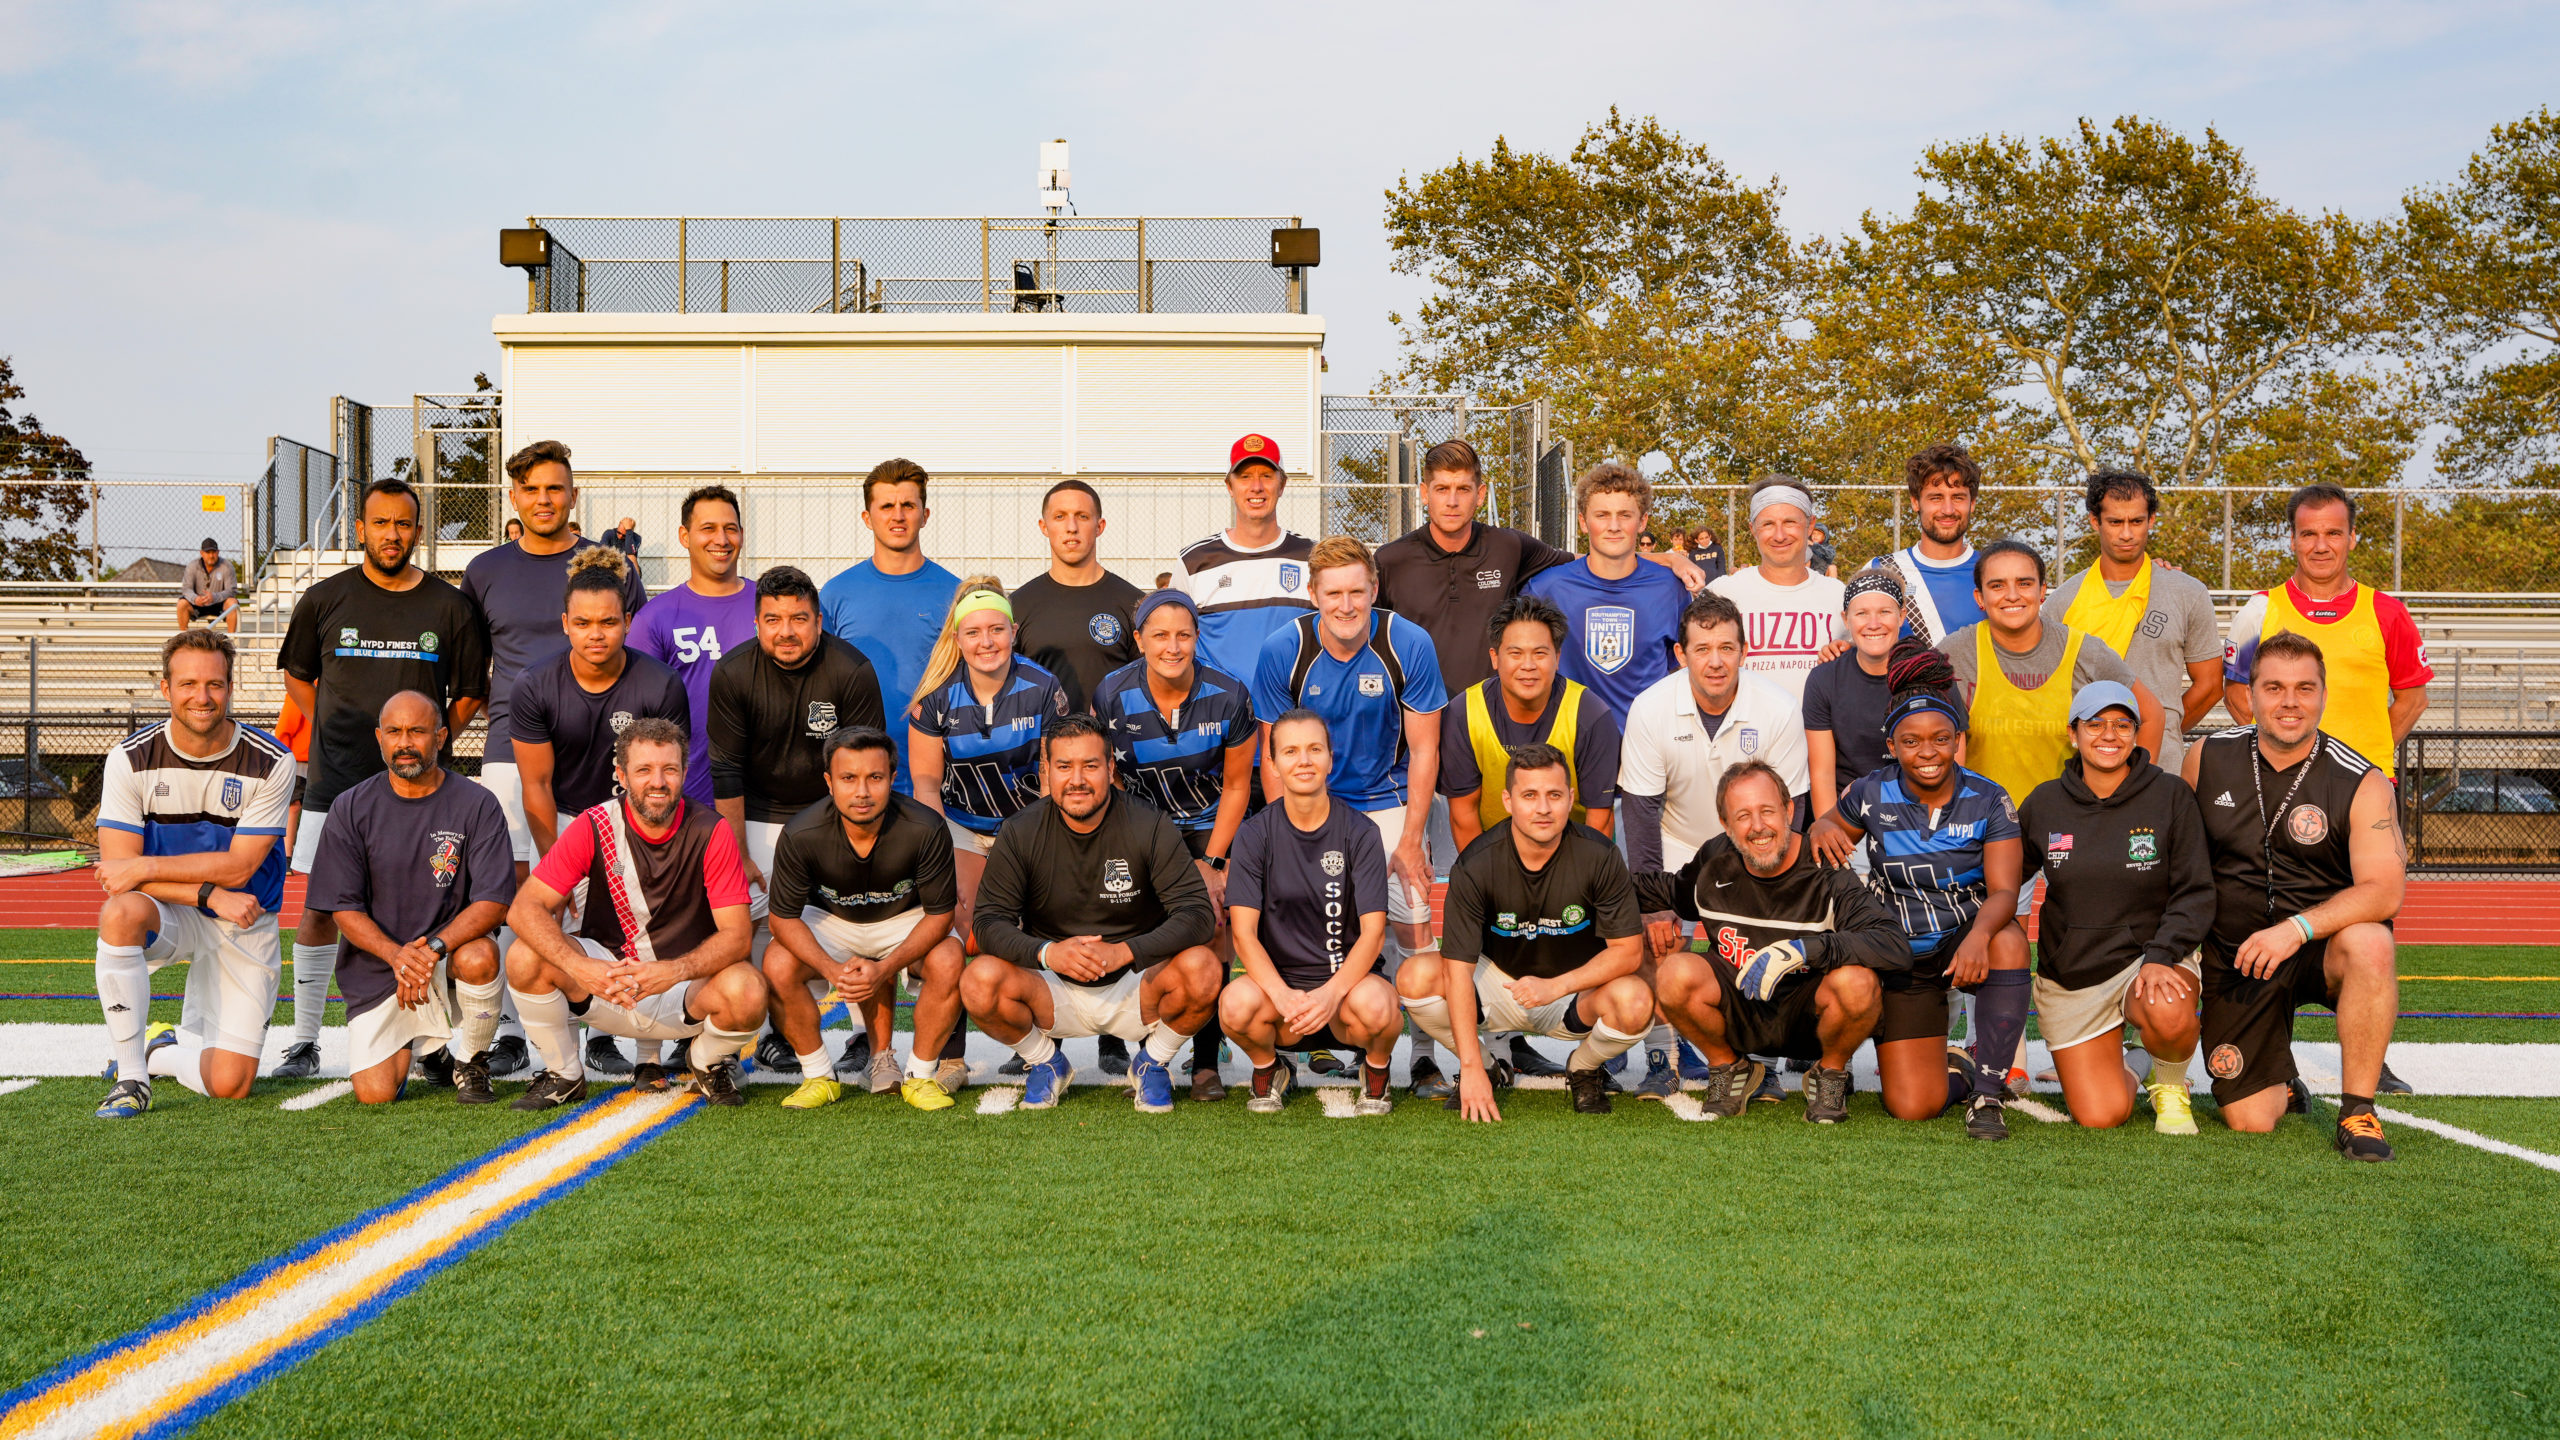 Colonial Sports Group, a local travel soccer program based in Southampton, and the NYPD soccer team played a charity soccer game on Sunday evening at Southampton High School.